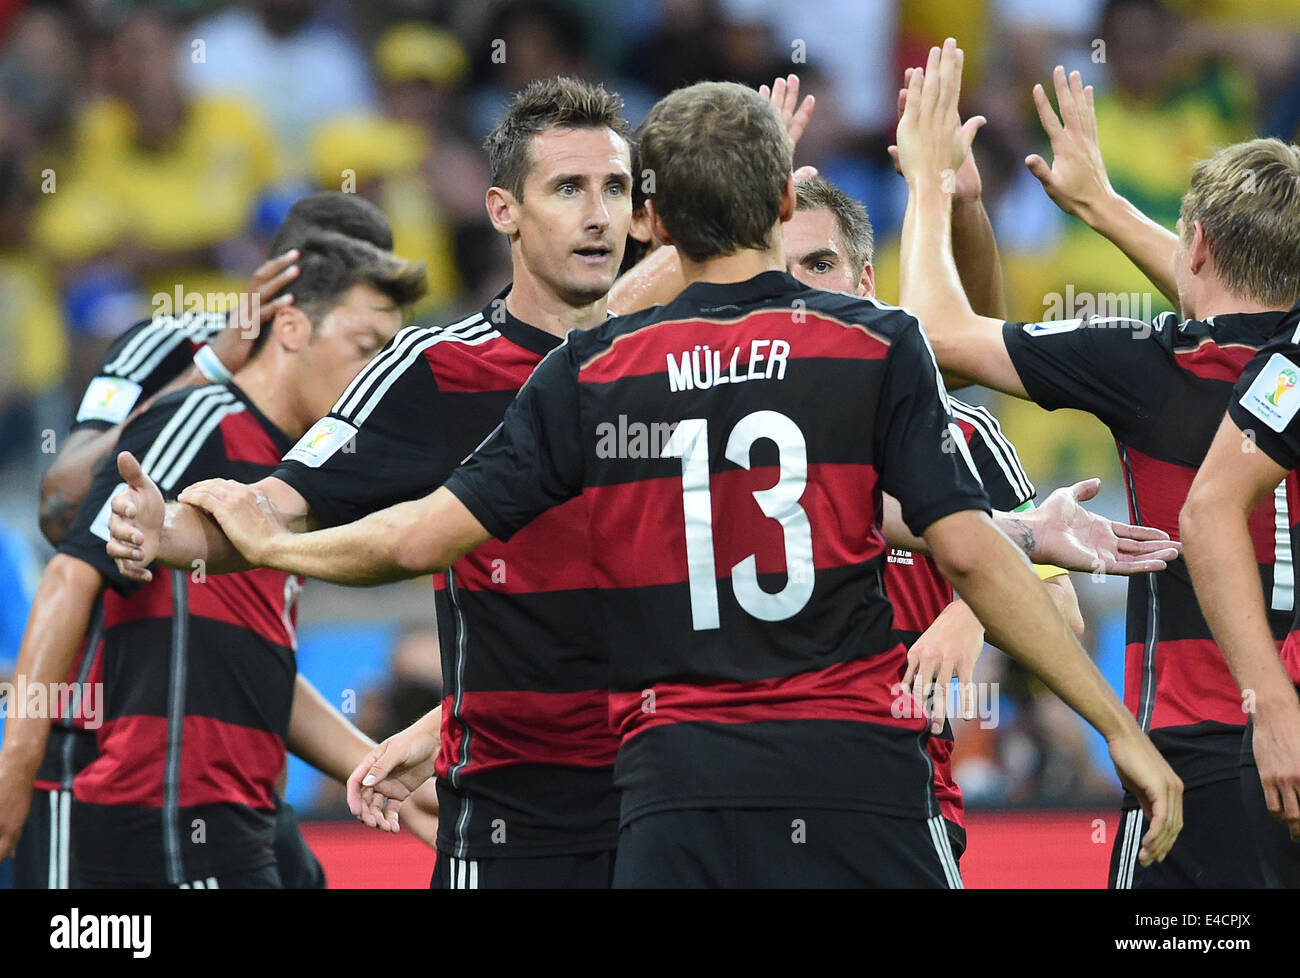 Belo Horizonte, Brazil. 08th July, 2014. Miroslav Klose (L) of Germany celebrates with his teammmates Thomas Mueller after scoring 0-2 goal during the FIFA World Cup 2014 semi-final soccer match between Brazil and Germany at Estadio Mineirao in Belo Horizonte, Brazil, 08 July 2014. Photo: Marcus Brandt/dpa/Alamy Live News Stock Photo